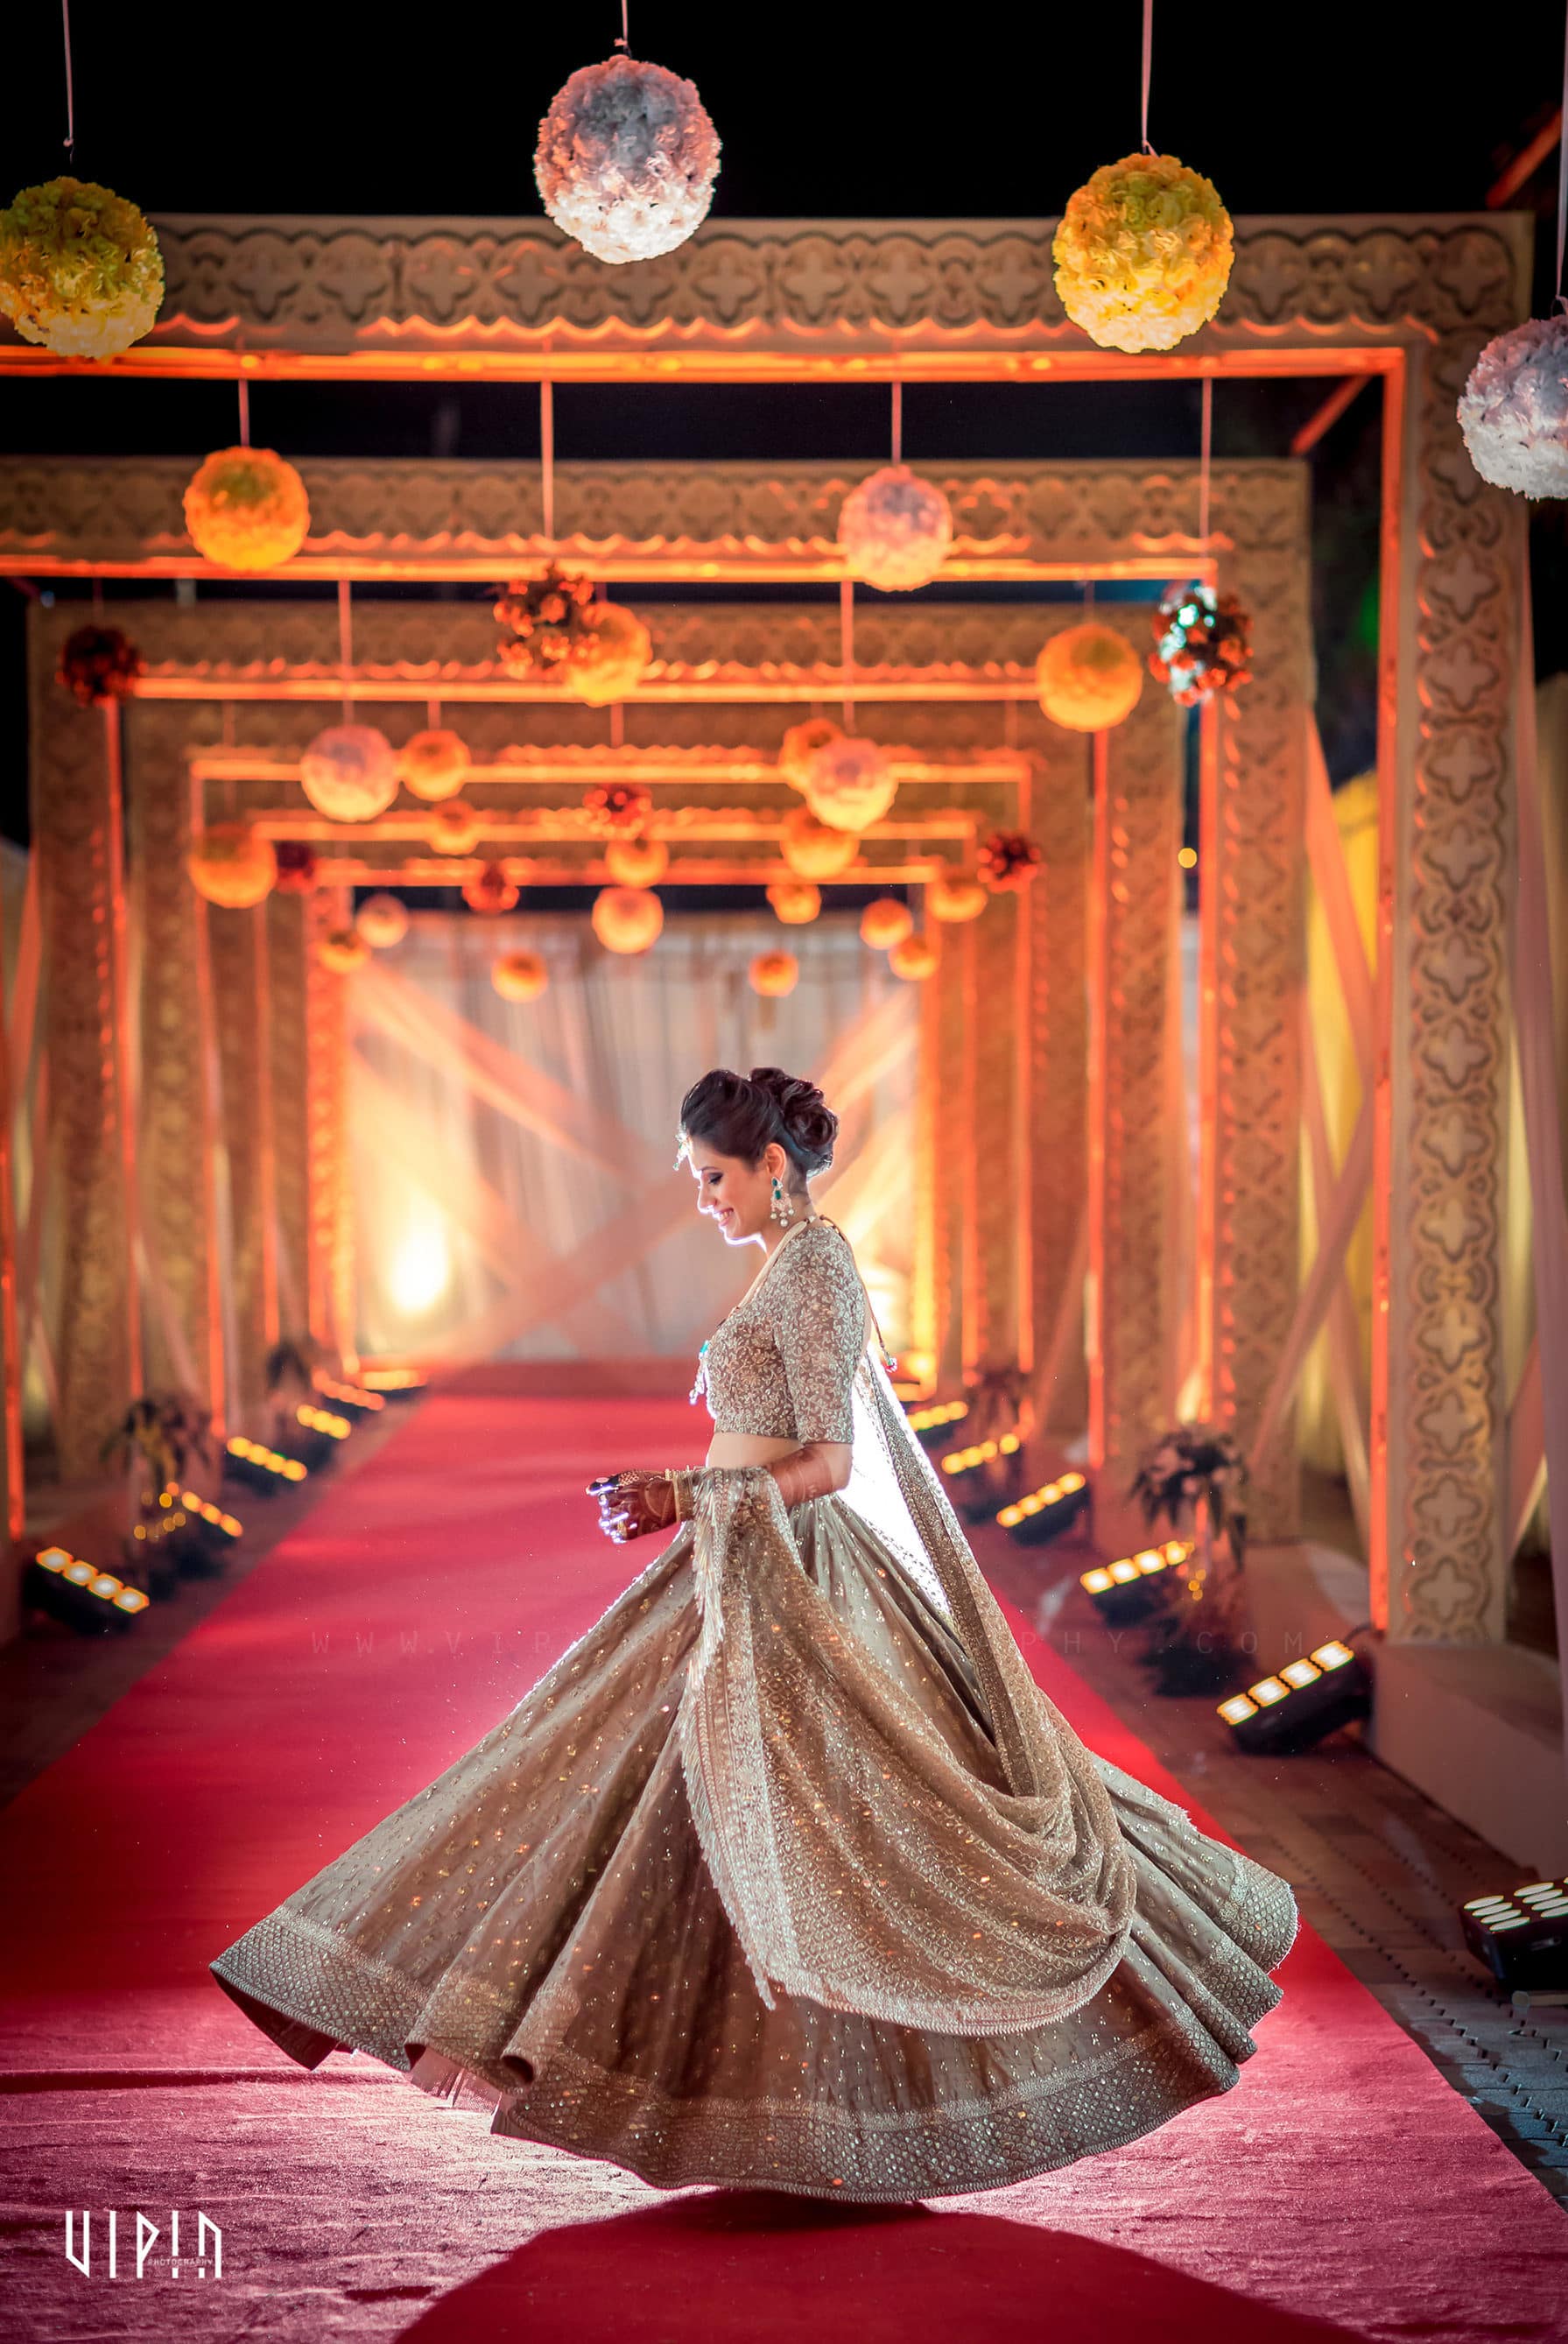 the bride rimple!:vipin photography, bianca, sabyasachi couture pvt ltd